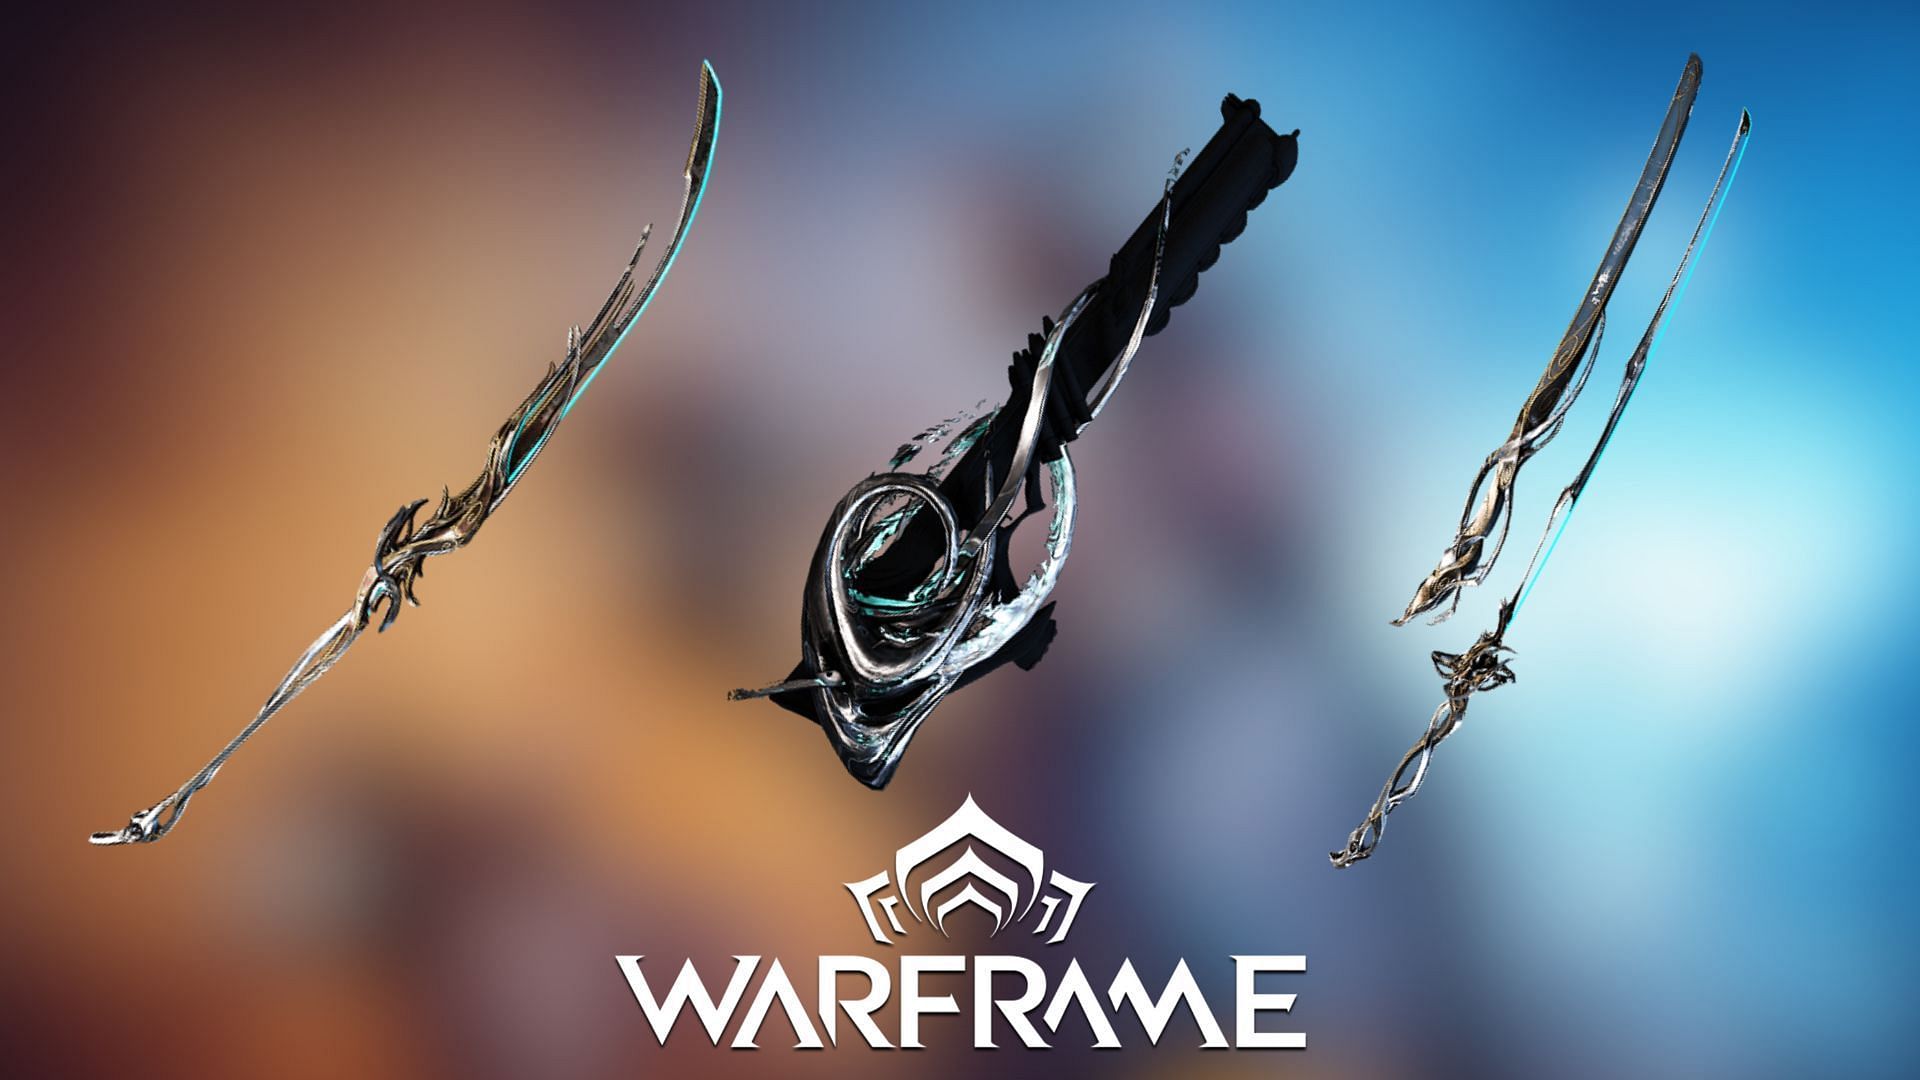 Maw Fang is used to craft and upgrade various weapons in Warframe. (Image via Digital Extremes)